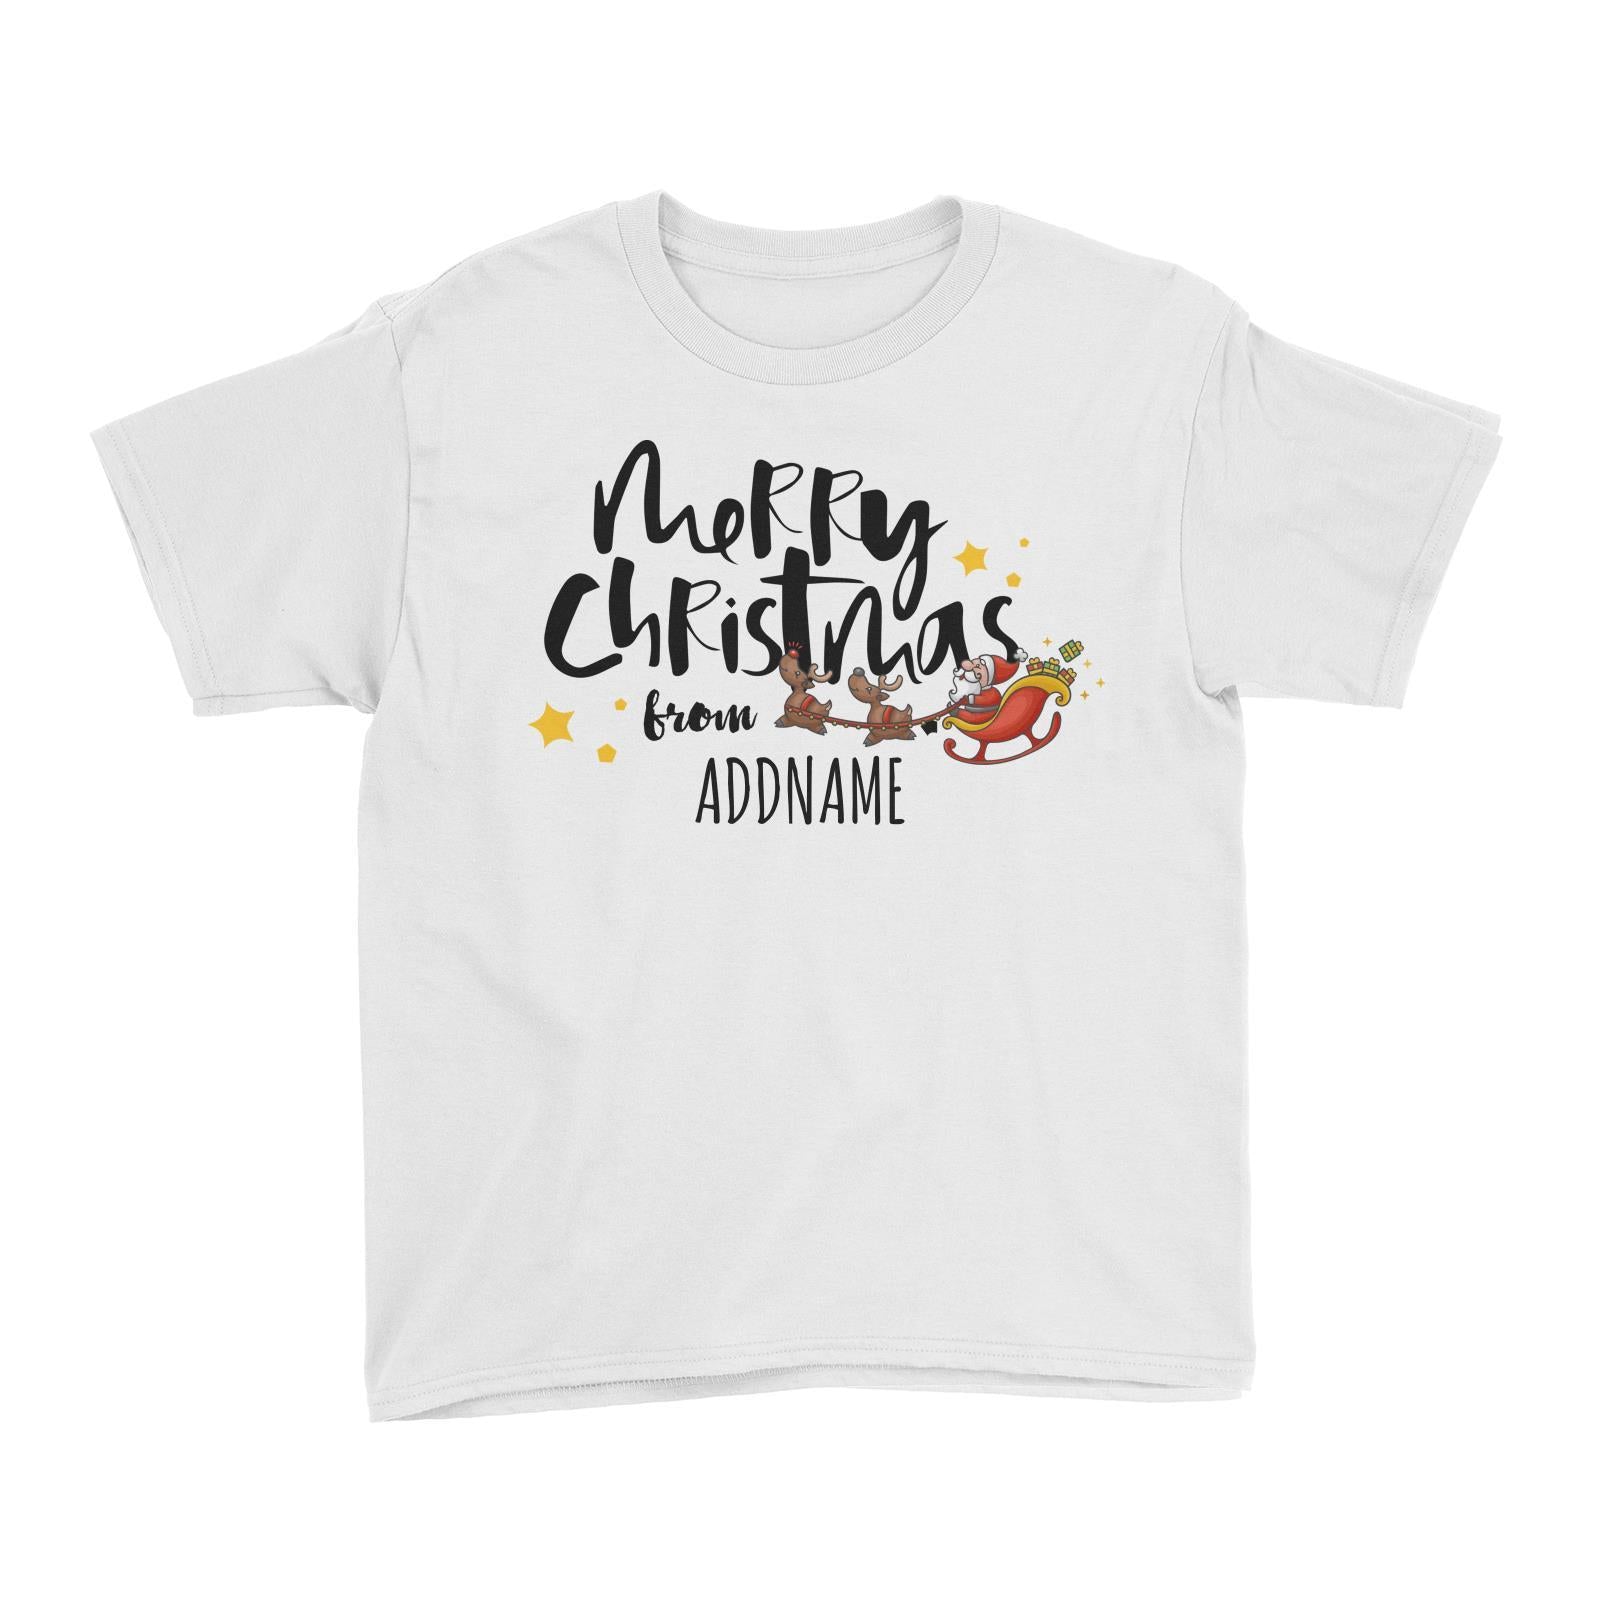 Cute Santa's Sleigh Merry Christmas Greeting Addname Kid's T-Shirt  Personalizable Designs Matching Family